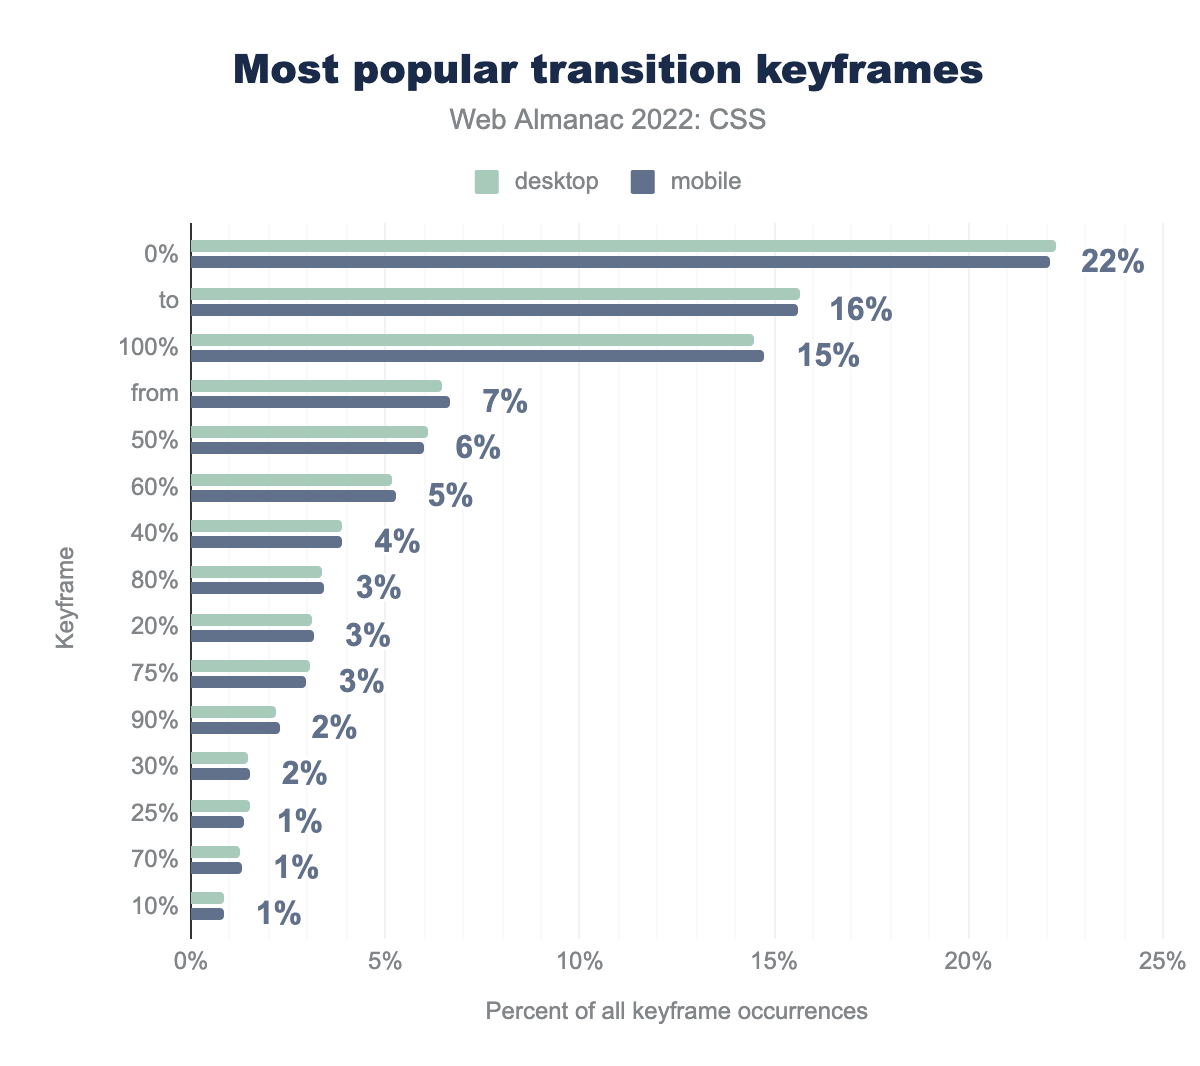 The most popular transition keyframes by percent of occurrences.